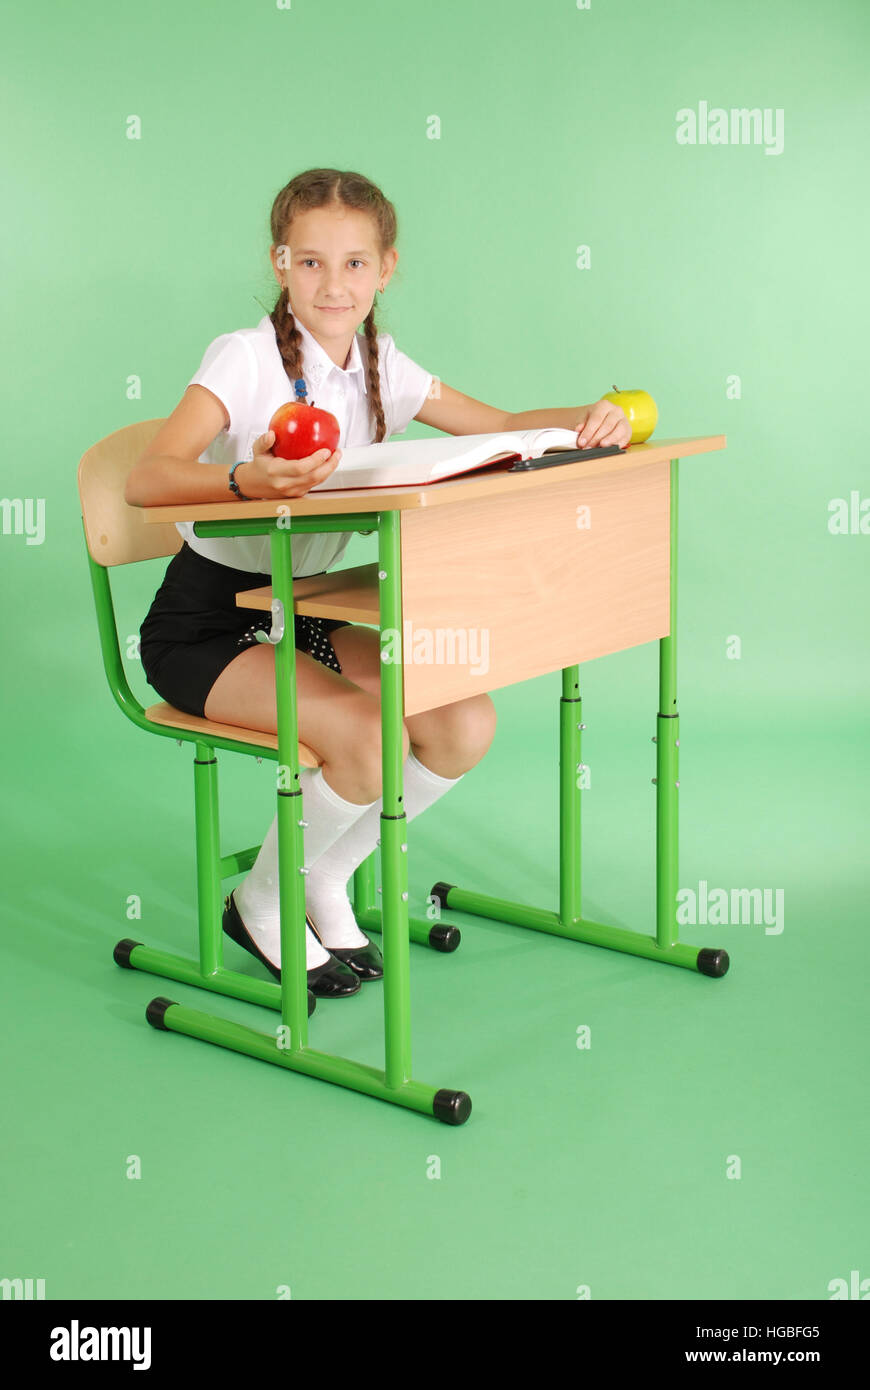 Girl in a school uniform sitting at a desk and reading a book isolated on greenGirl in a school uniform sitting at a desk and re Stock Photo